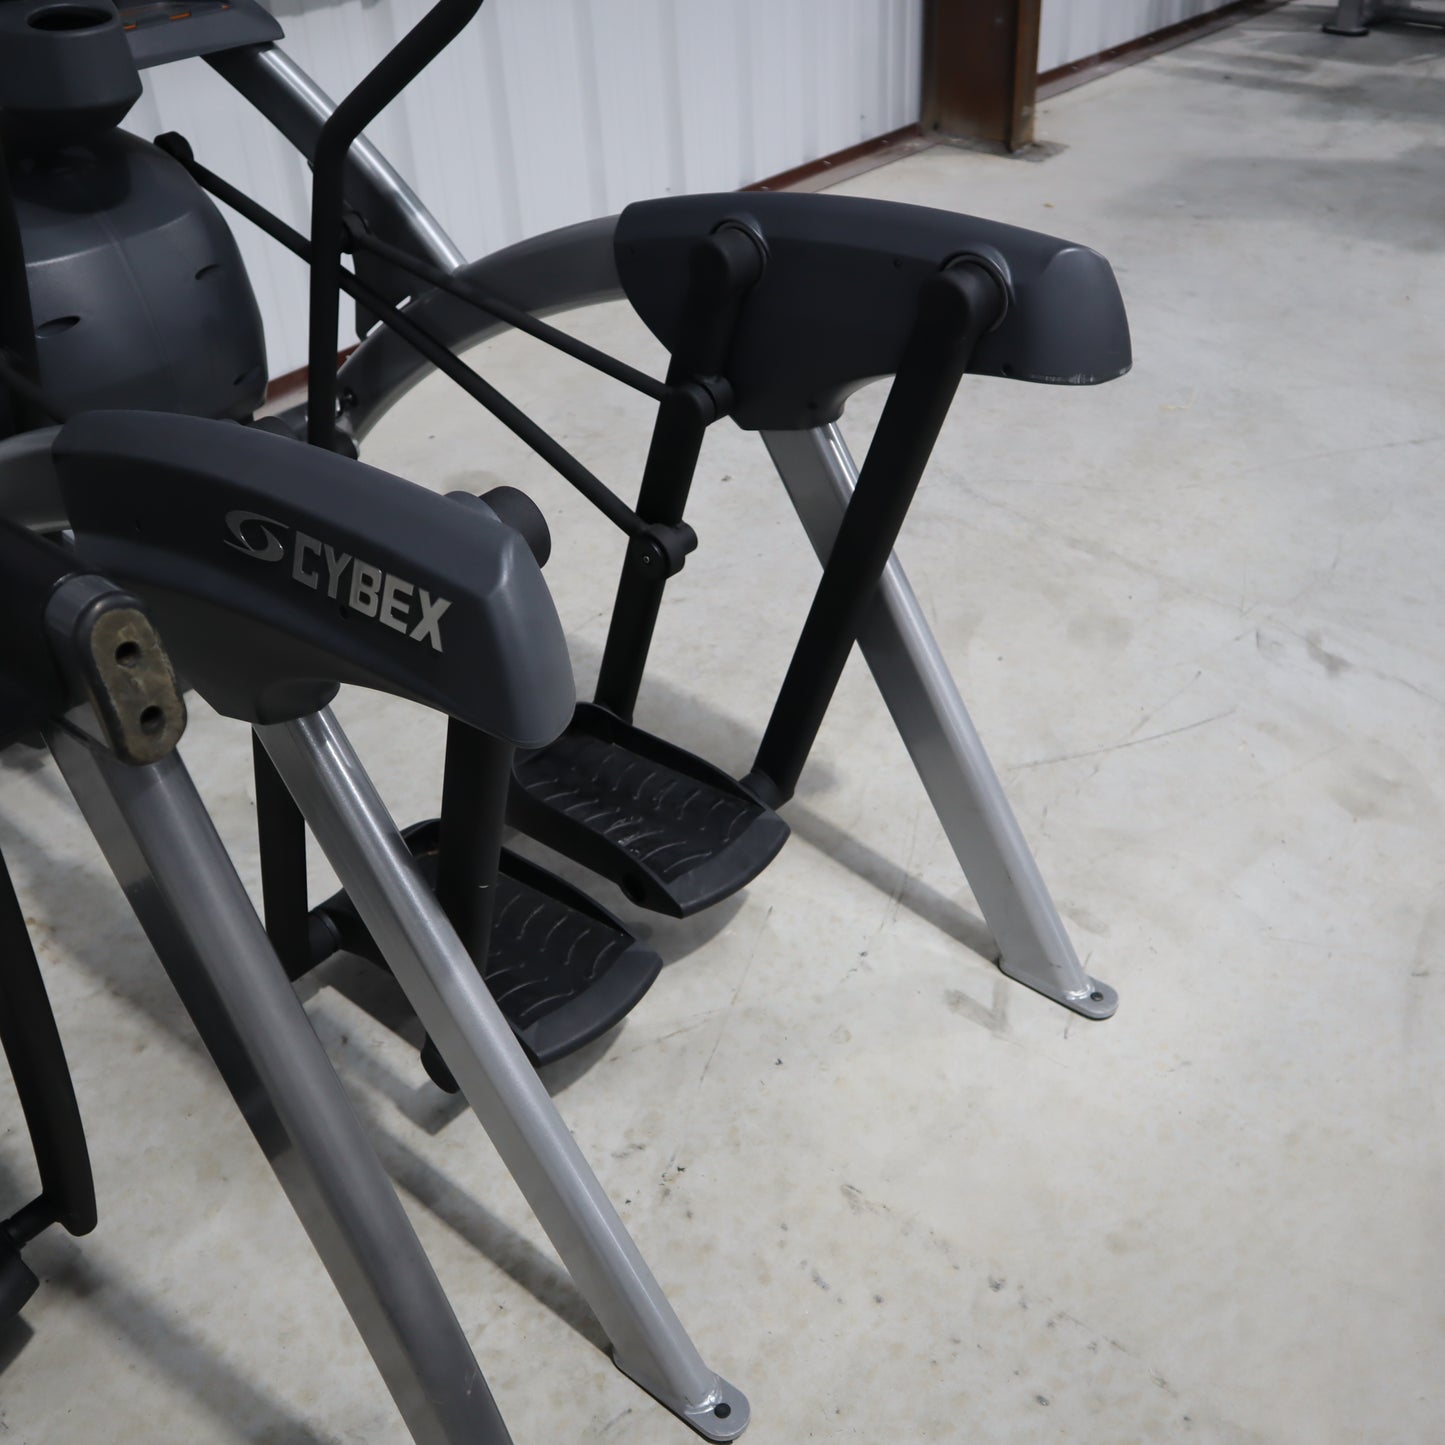 Paquete Cybex Arc Trainer * One 630A Total Body, One 626AT Total Body * (Usado)